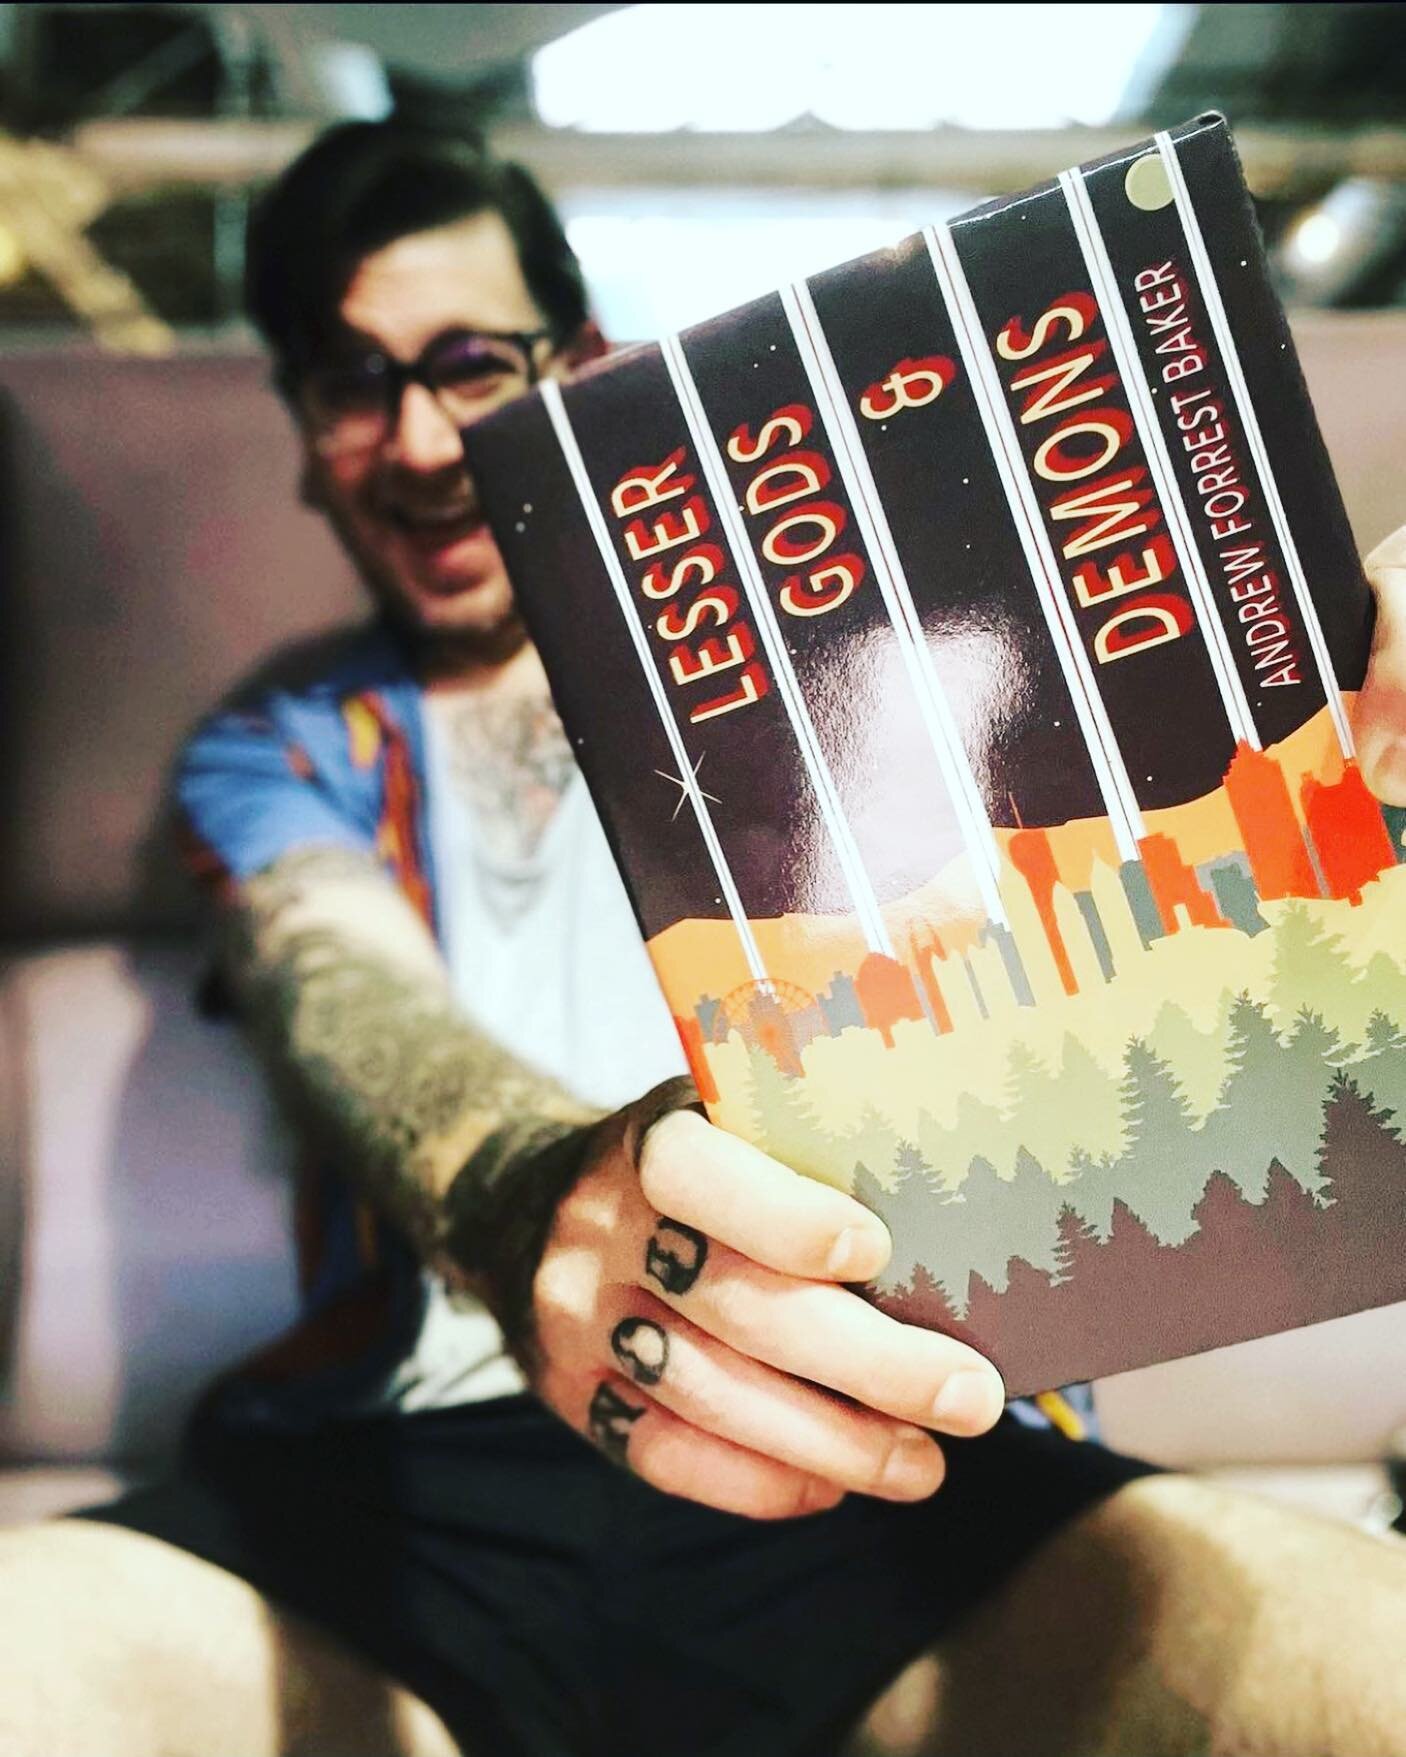 Reminder that Andrew&rsquo;s new book Lesser Gods &amp; Demons is available now through @parlyaree in hardback and digital form! Get it now before the story comes true. #atlwriters #atlauthors